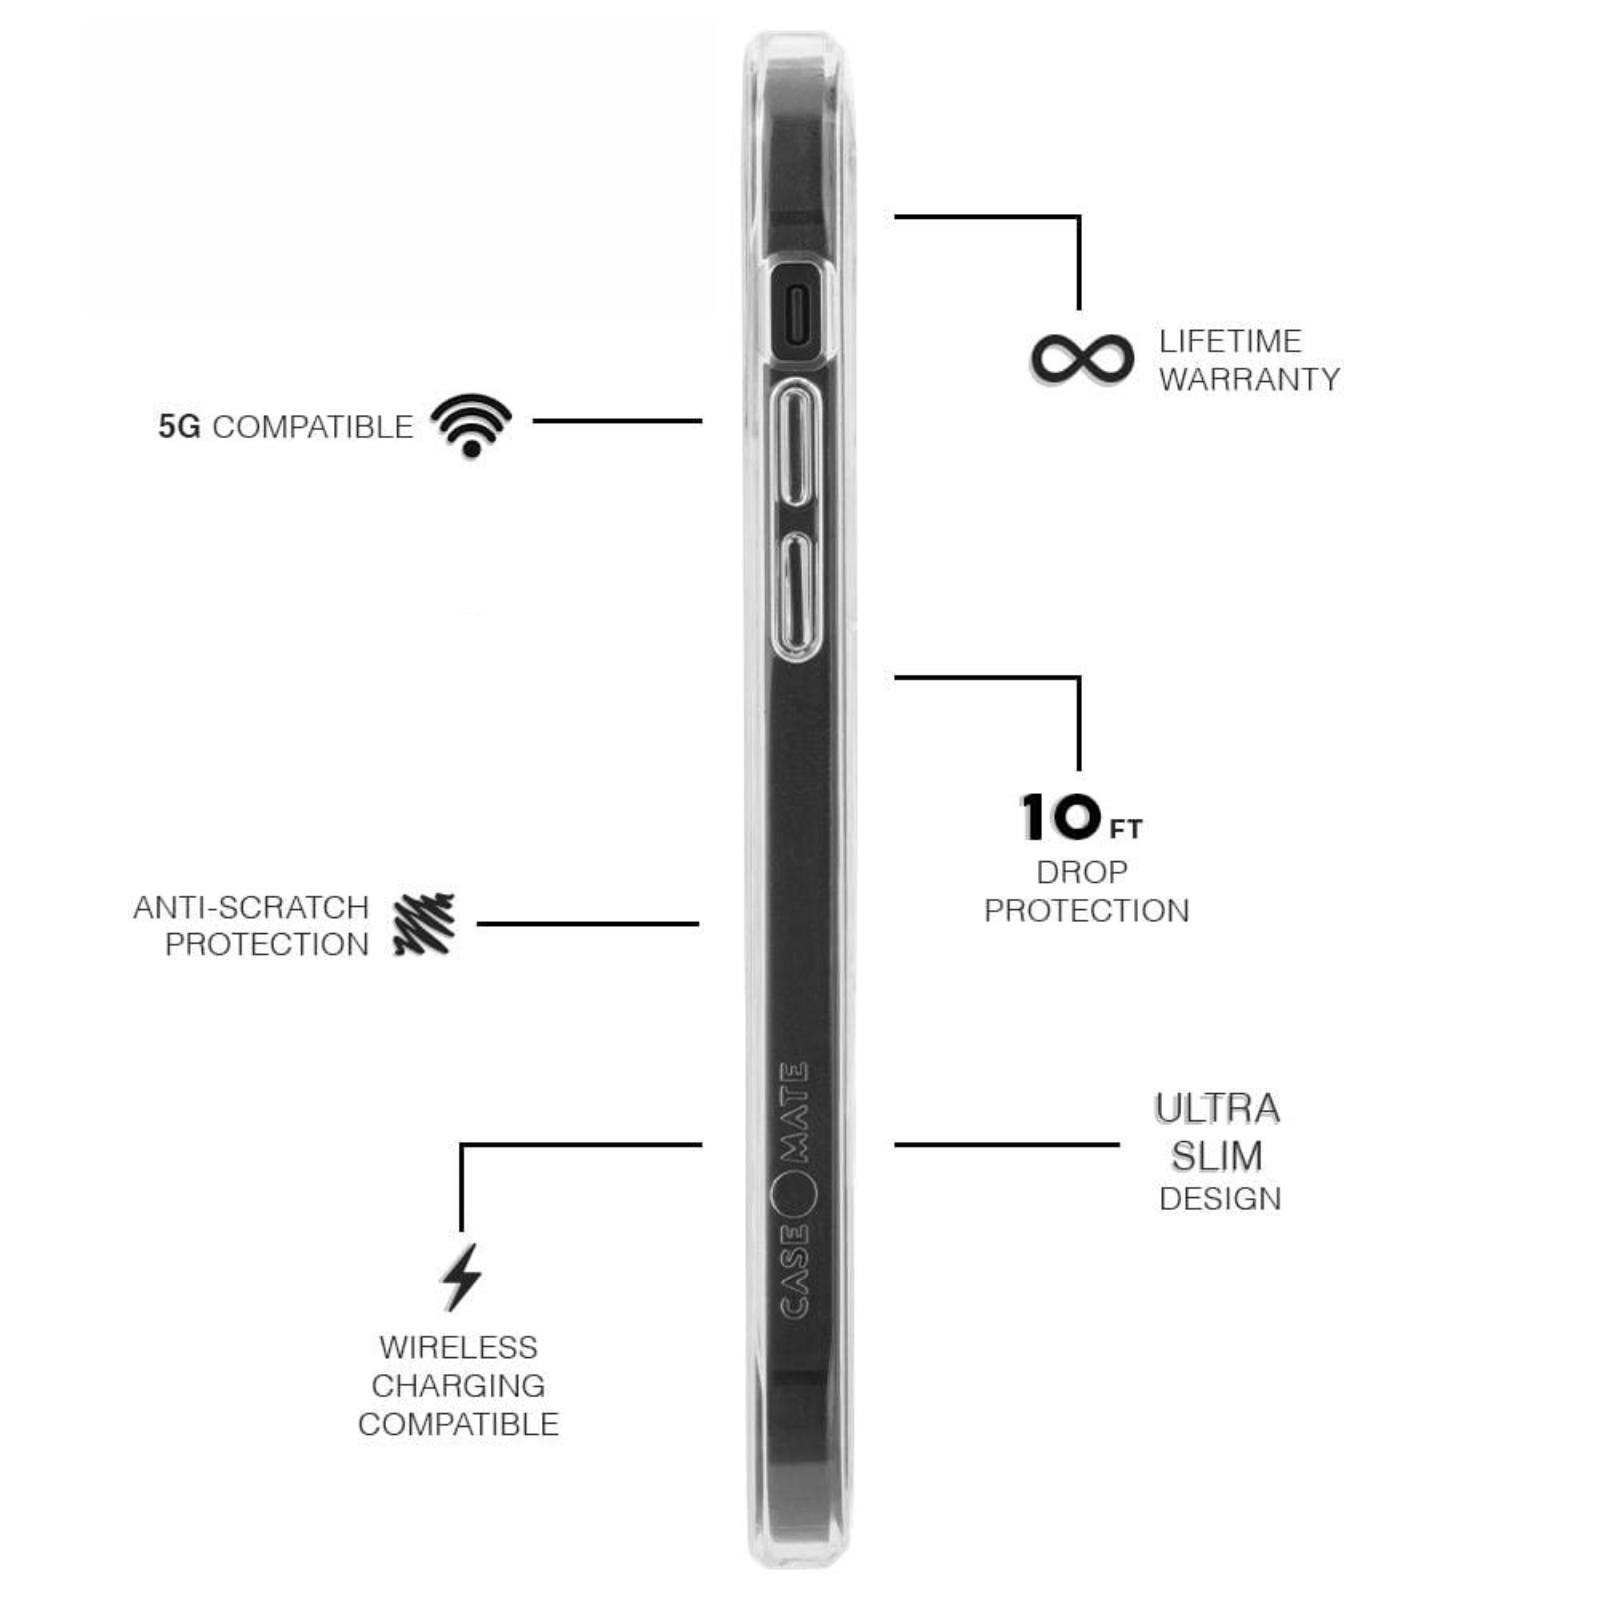 Features 5G Compatible, Anti-Scratch Protection, Wireless Charging compatible, Lifetime warranty, 10 ft Drop Protection, Ultra Slim Design. color::Clear